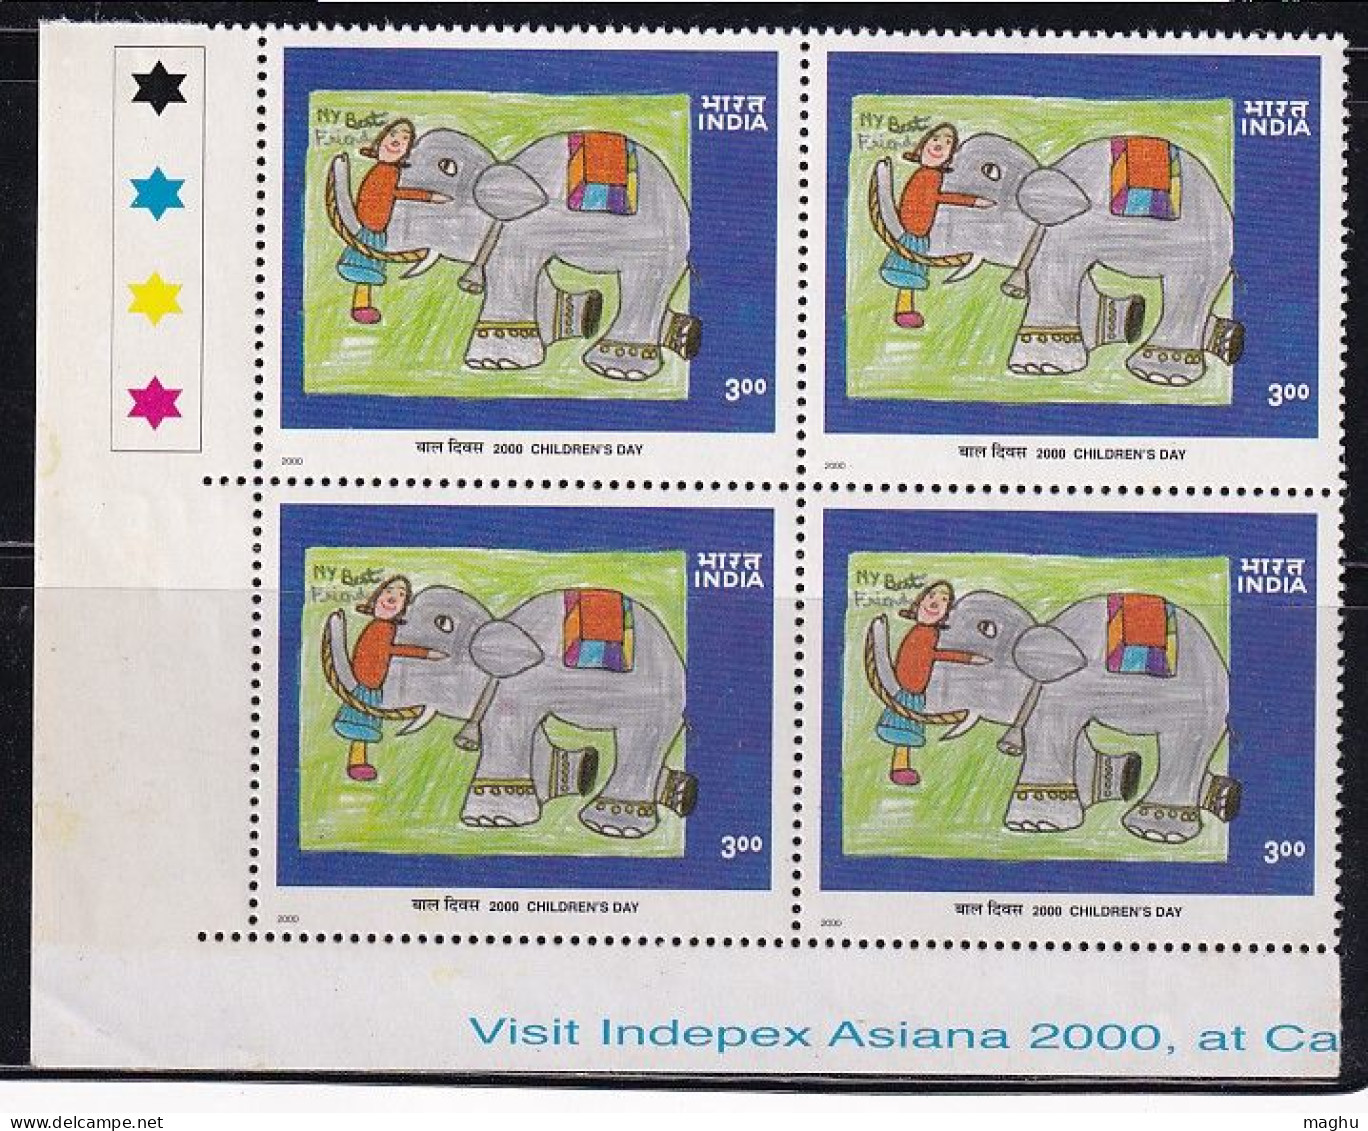 T/L Block Of 4,India MNH 2000,  Childrens Day, Art Painting 'My Best Friend', Kinder Girl, Elephant, Animal, - Hojas Bloque